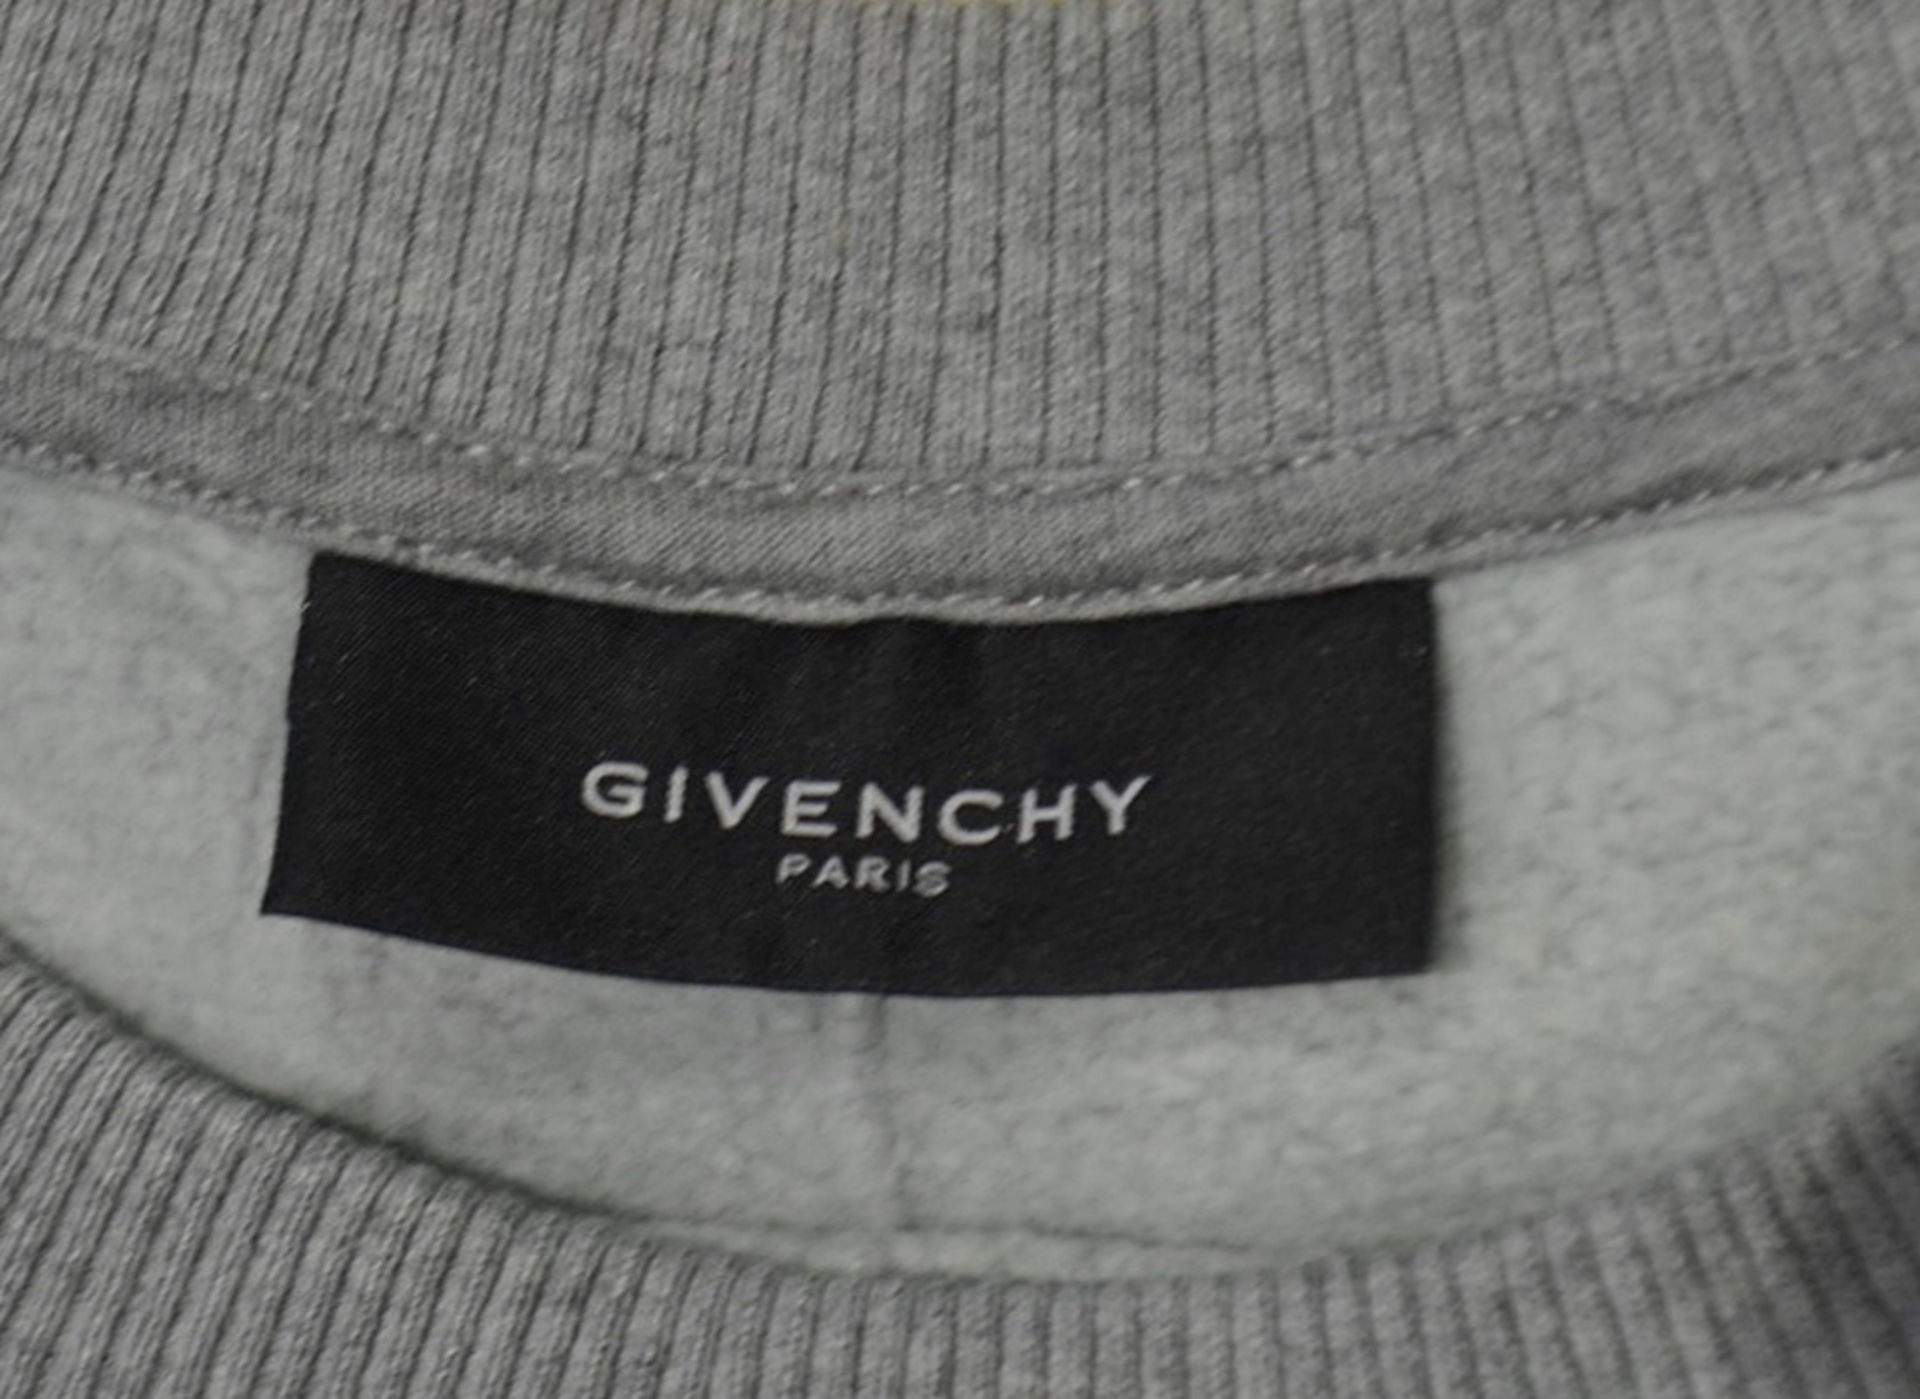 1 x Men's Genuine Givenchy Sweatshirt In Grey With Lambskin Panel On Front With Embroidered Border - Image 5 of 9